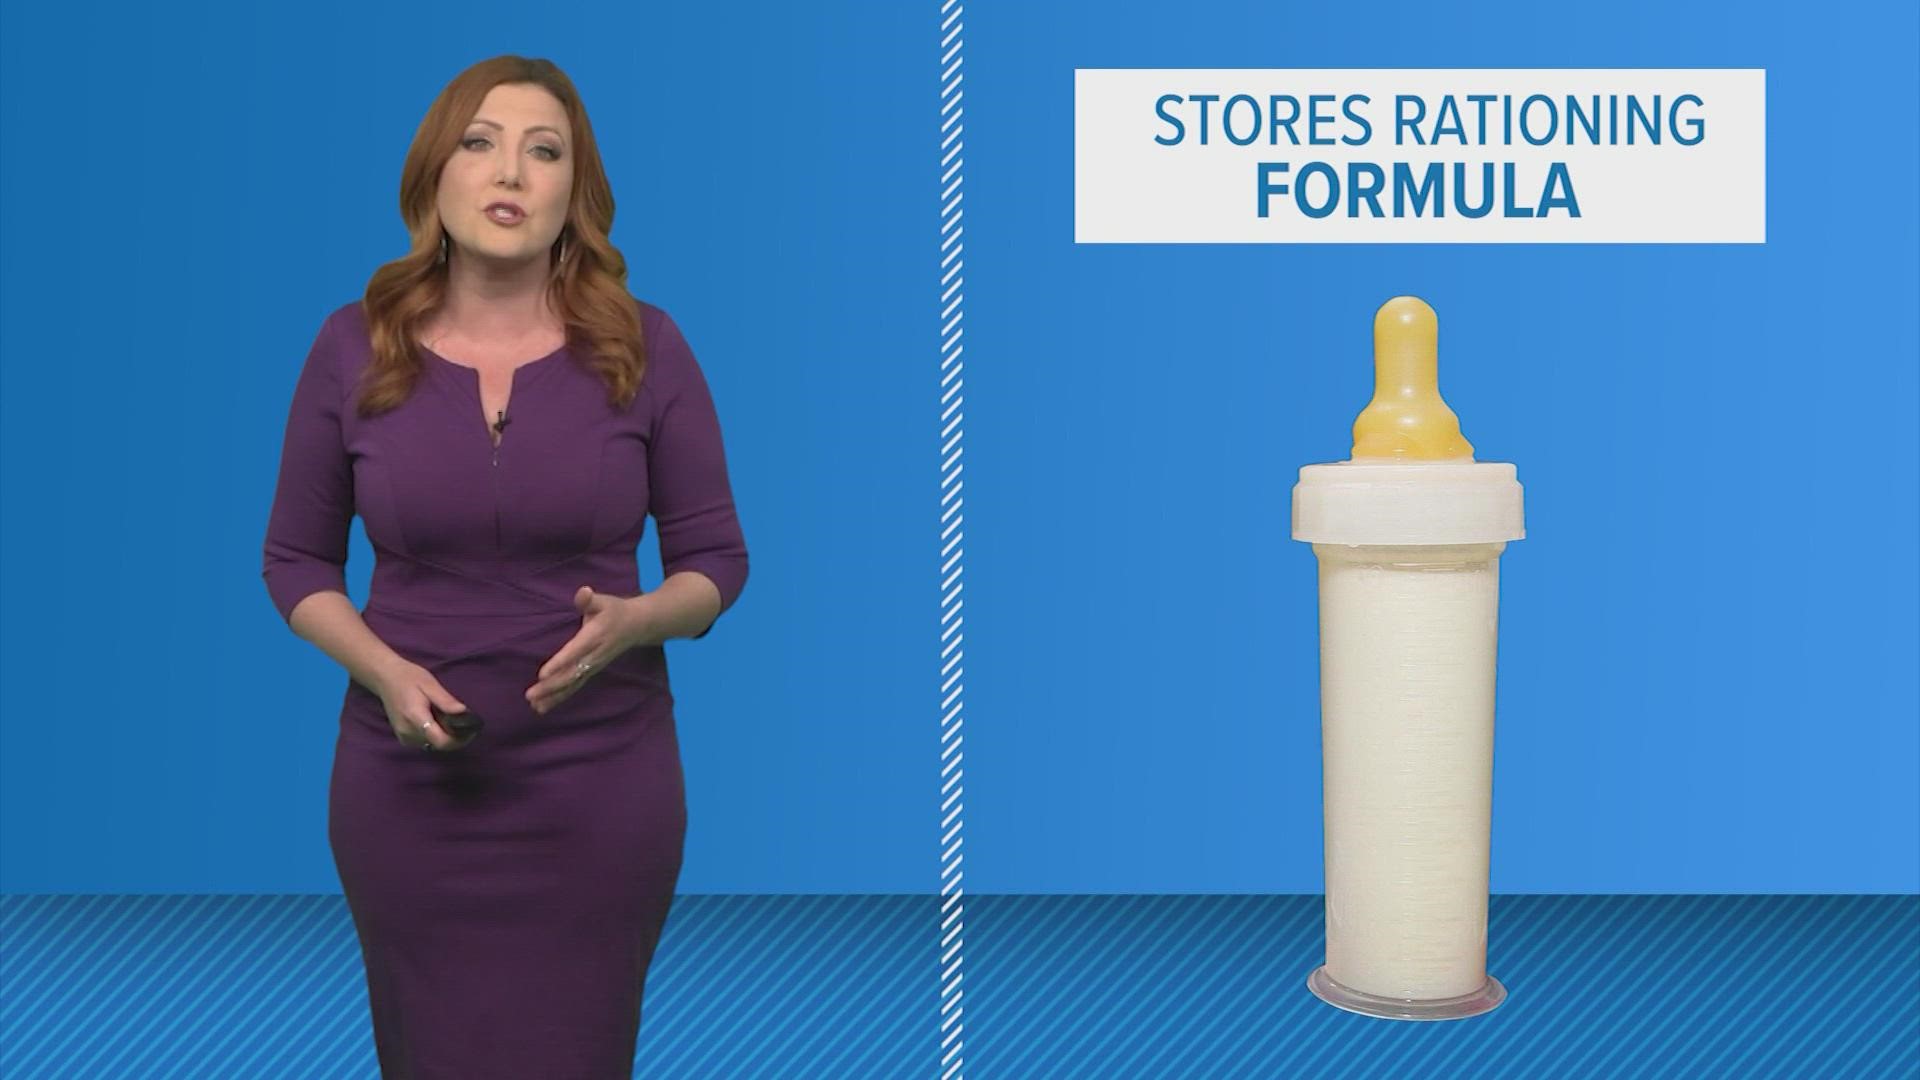 In the first week of April, 31% of baby formula products were out of stock.